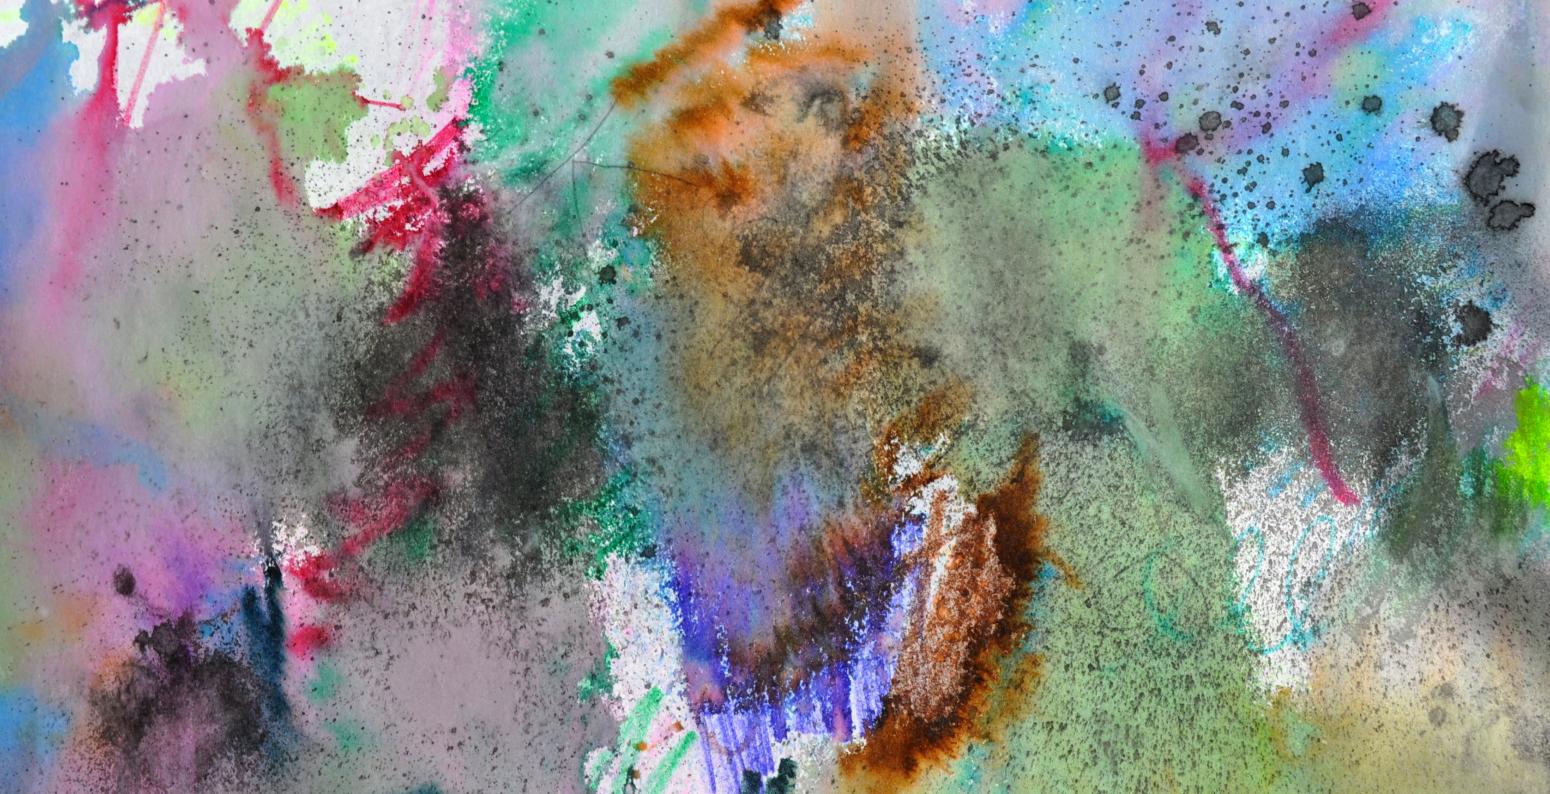 A watercolor painting with splashes of colors across it.